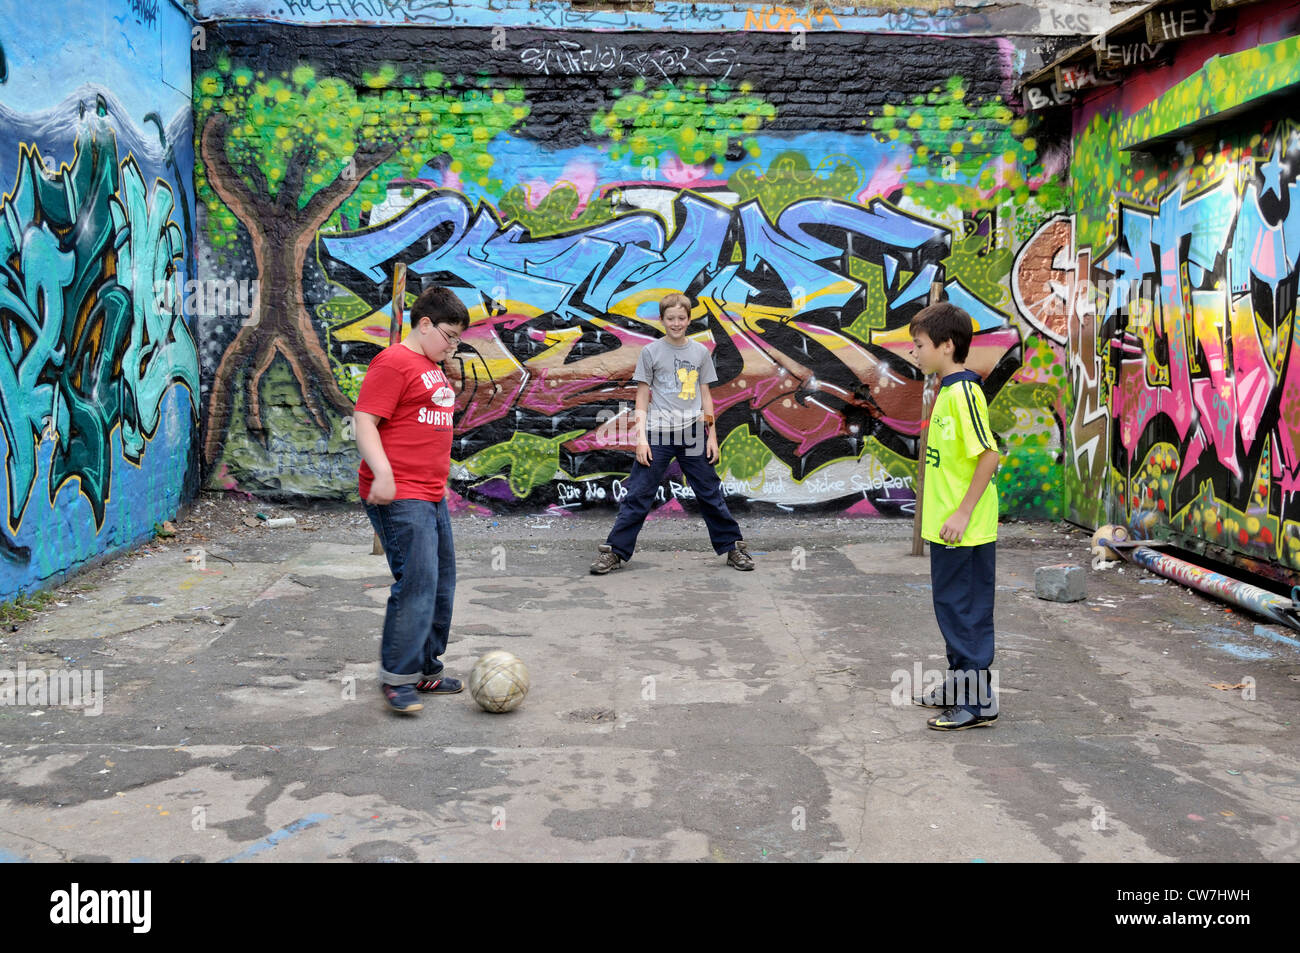 Serbian, German and Thai boys playing together soccer in the street, Germany, North Rhine-Westphalia, Cologne Stock Photo